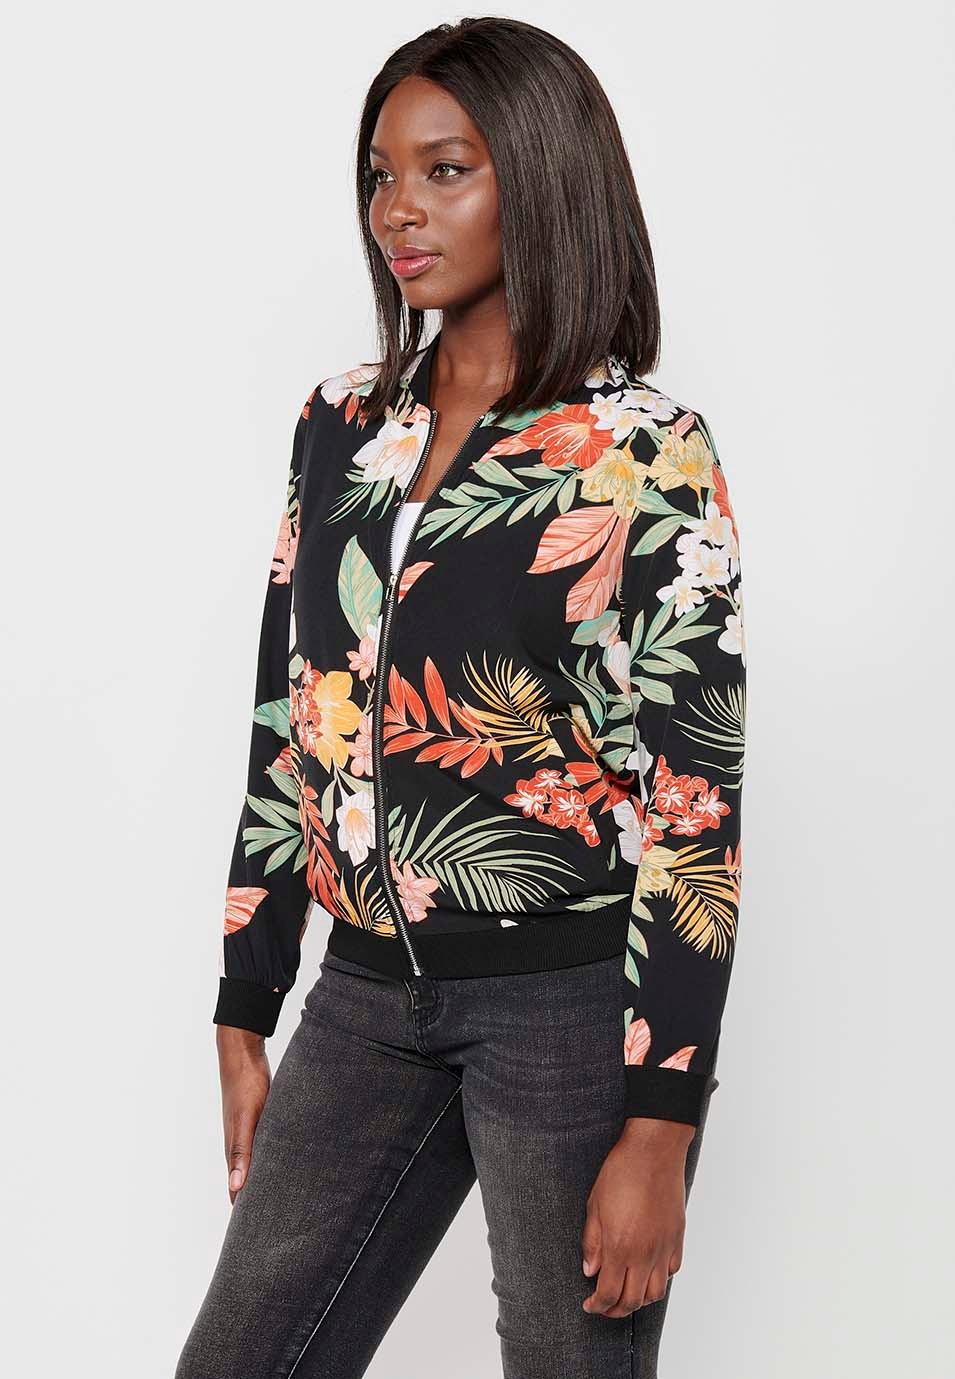 Long-sleeved sweatshirt jacket with ribbed finishes and floral print with front zipper closure in Multicolor for Women 7